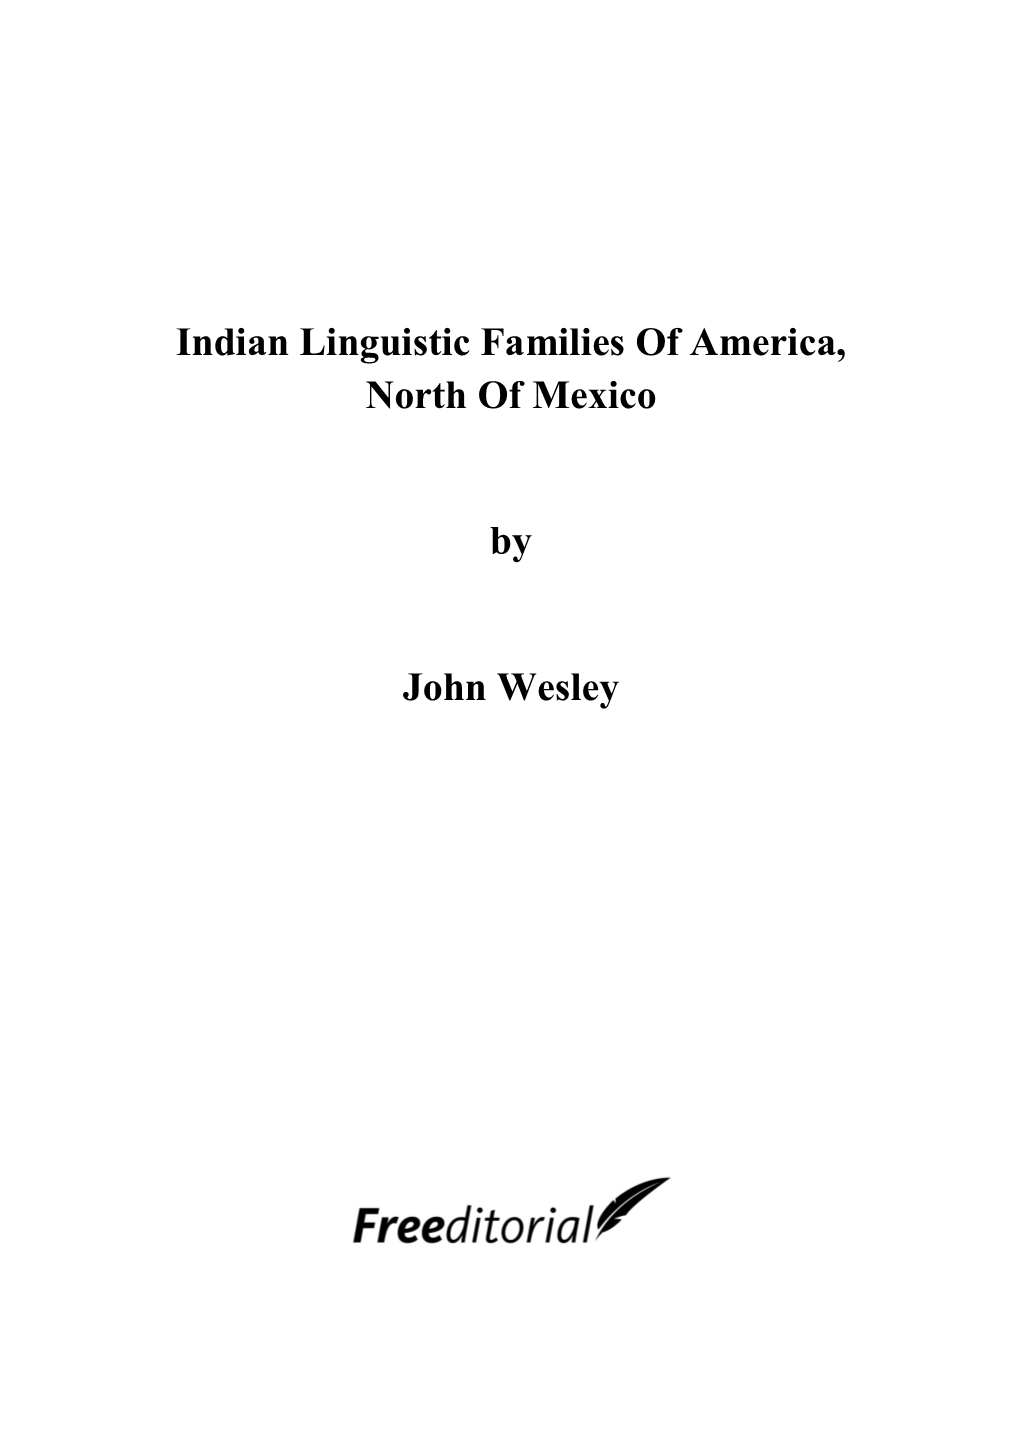 Indian Linguistic Families of America, North of Mexico by John Wesley